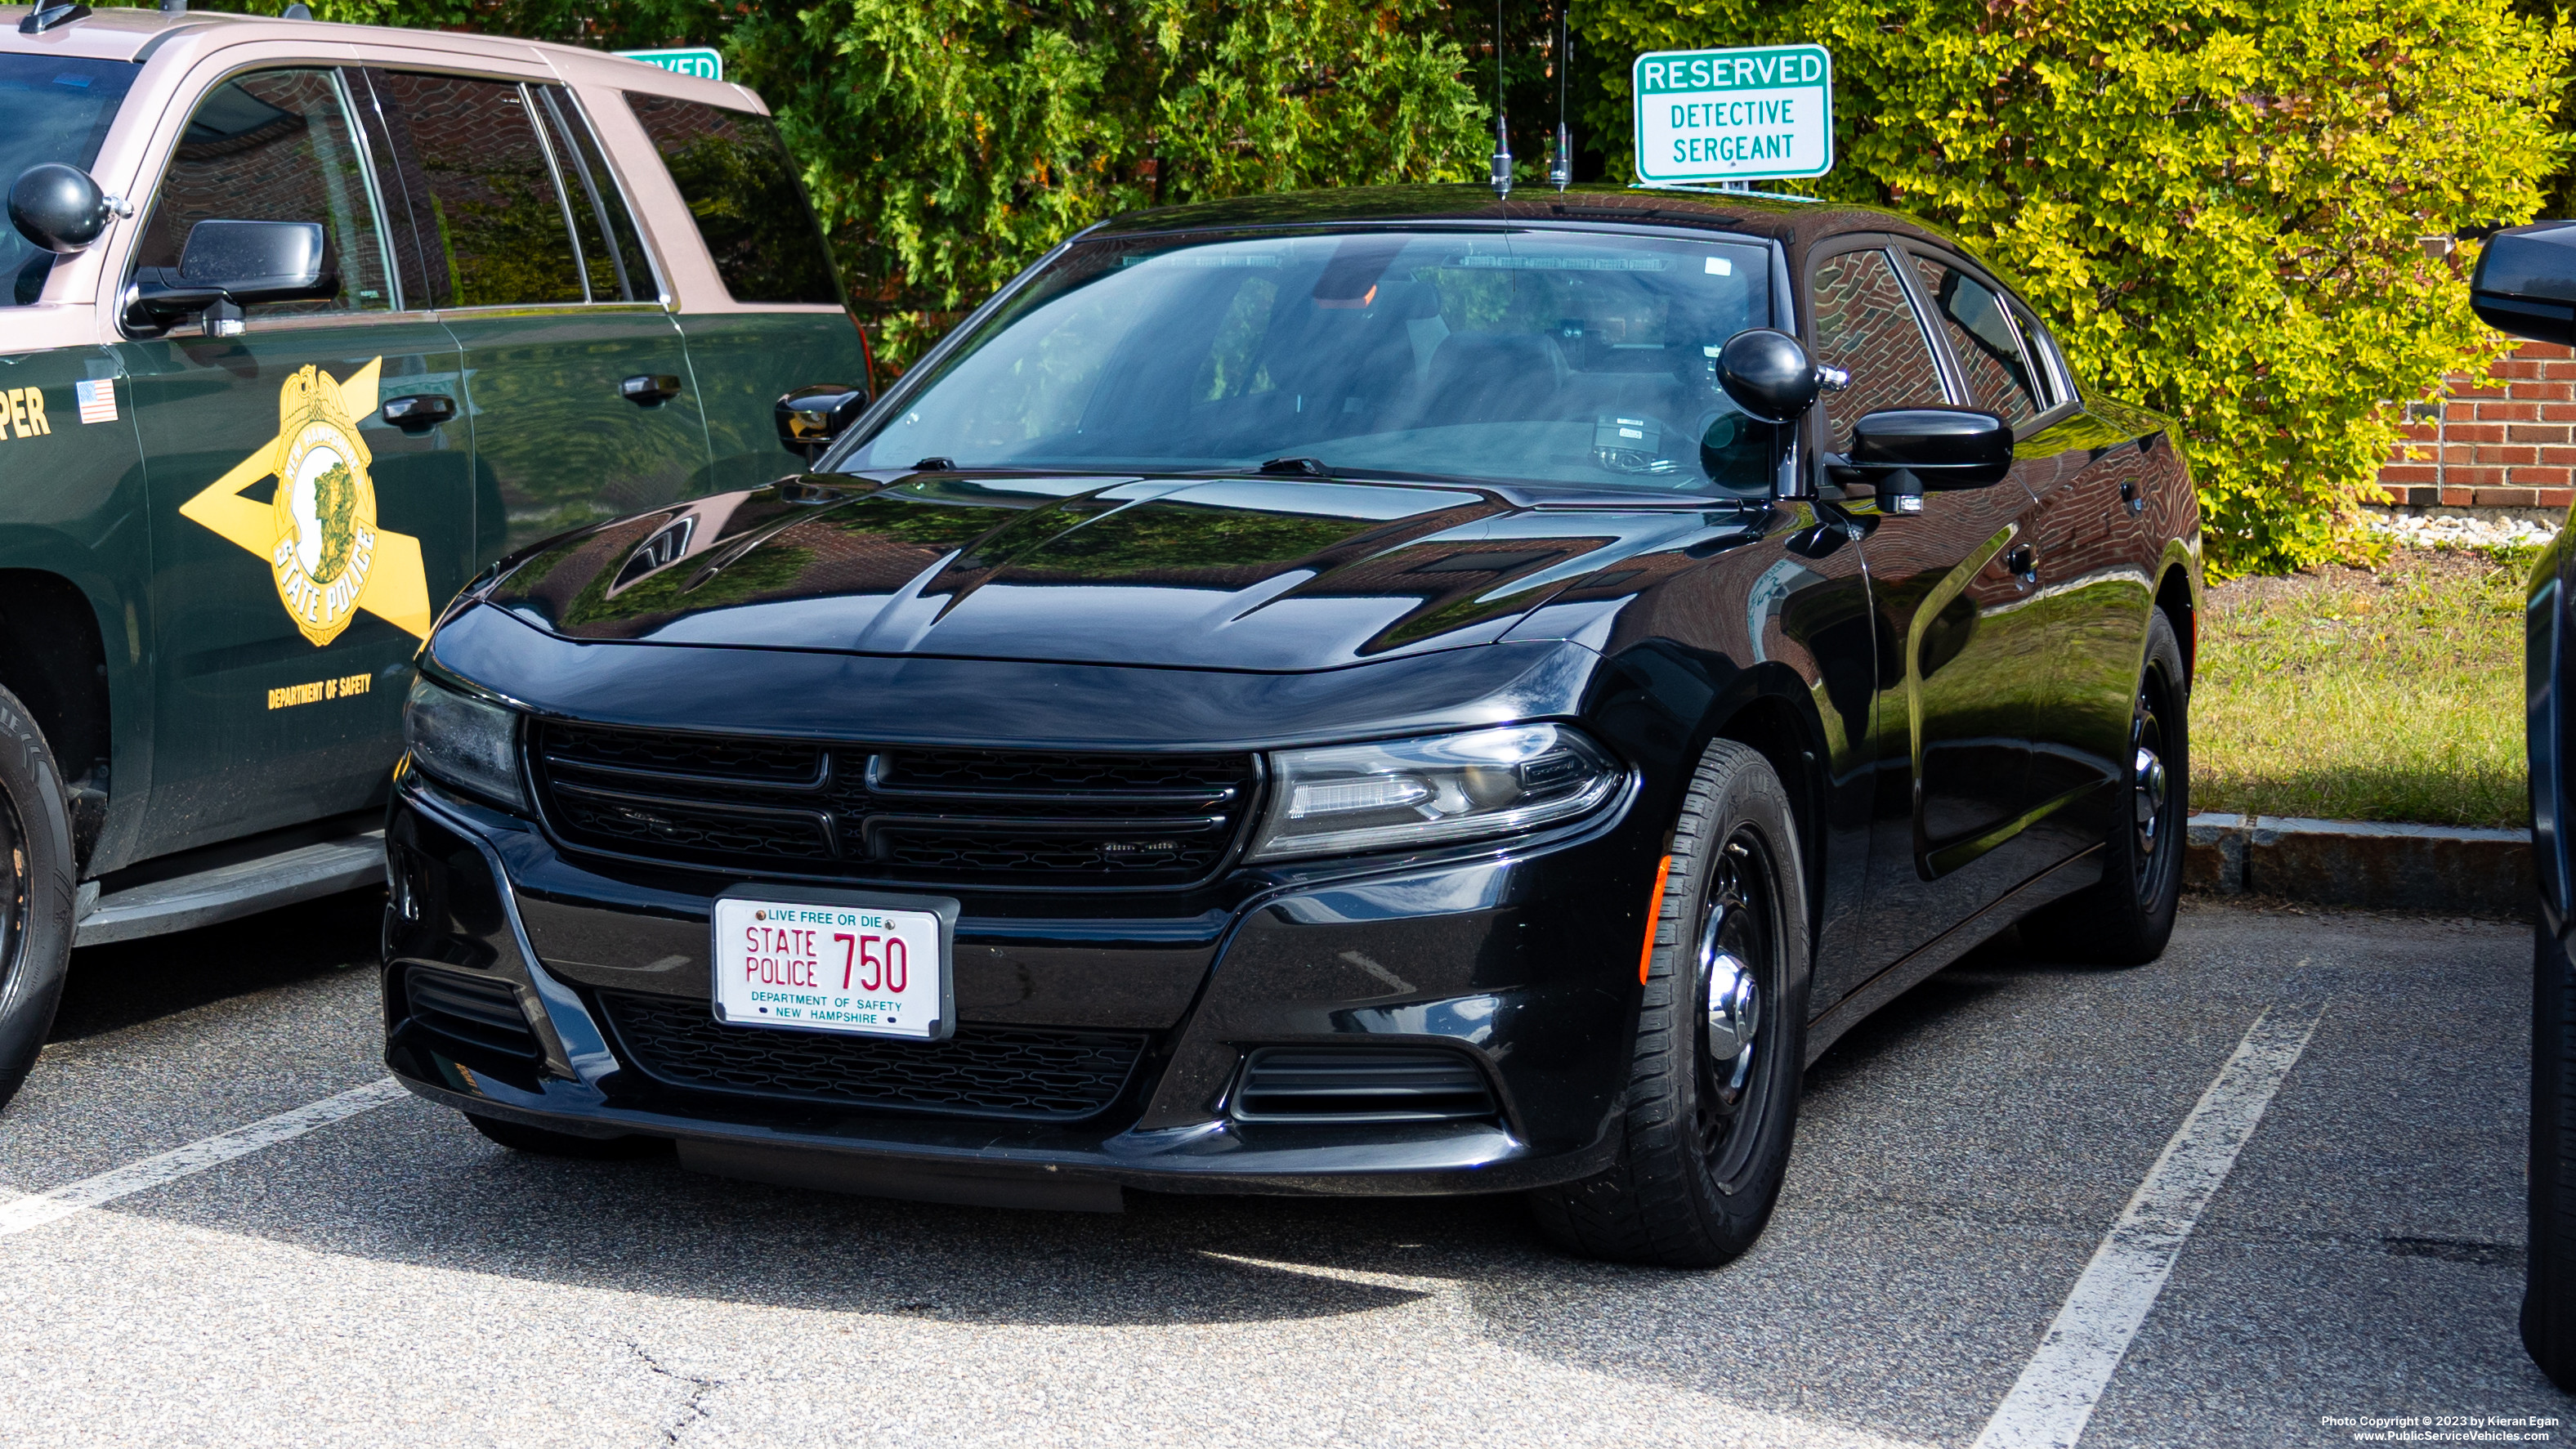 A photo  of New Hampshire State Police
            Cruiser 750, a 2017-2021 Dodge Charger             taken by Kieran Egan